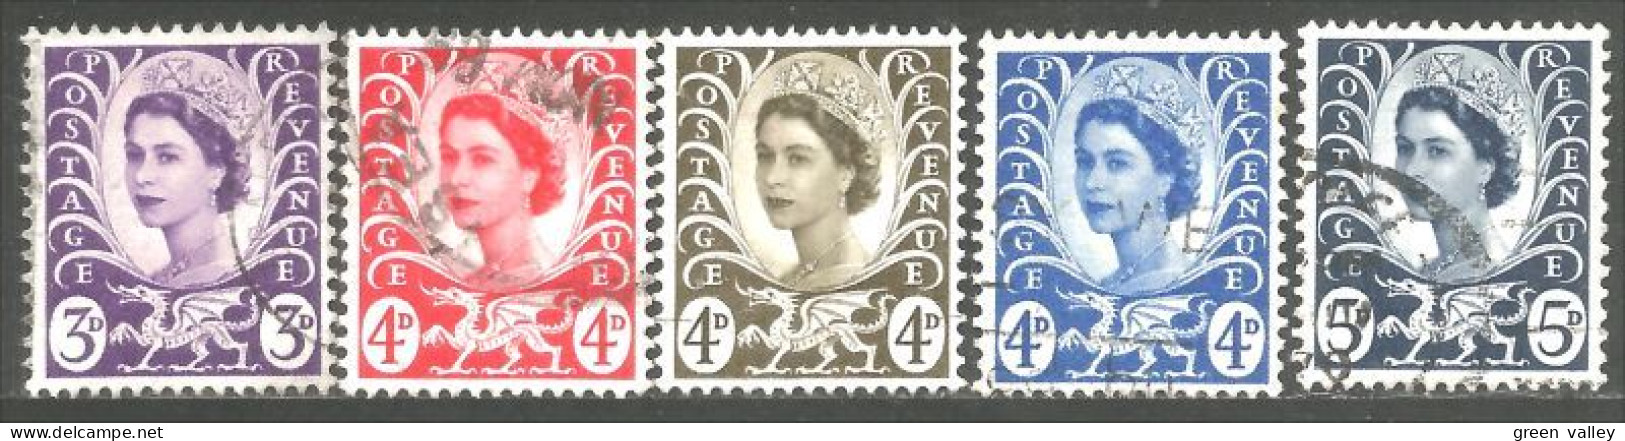 414 G-B Regionals Wales And Monmouthshire 5 Stamps Queen Elizabeth (REG-33) - Wales